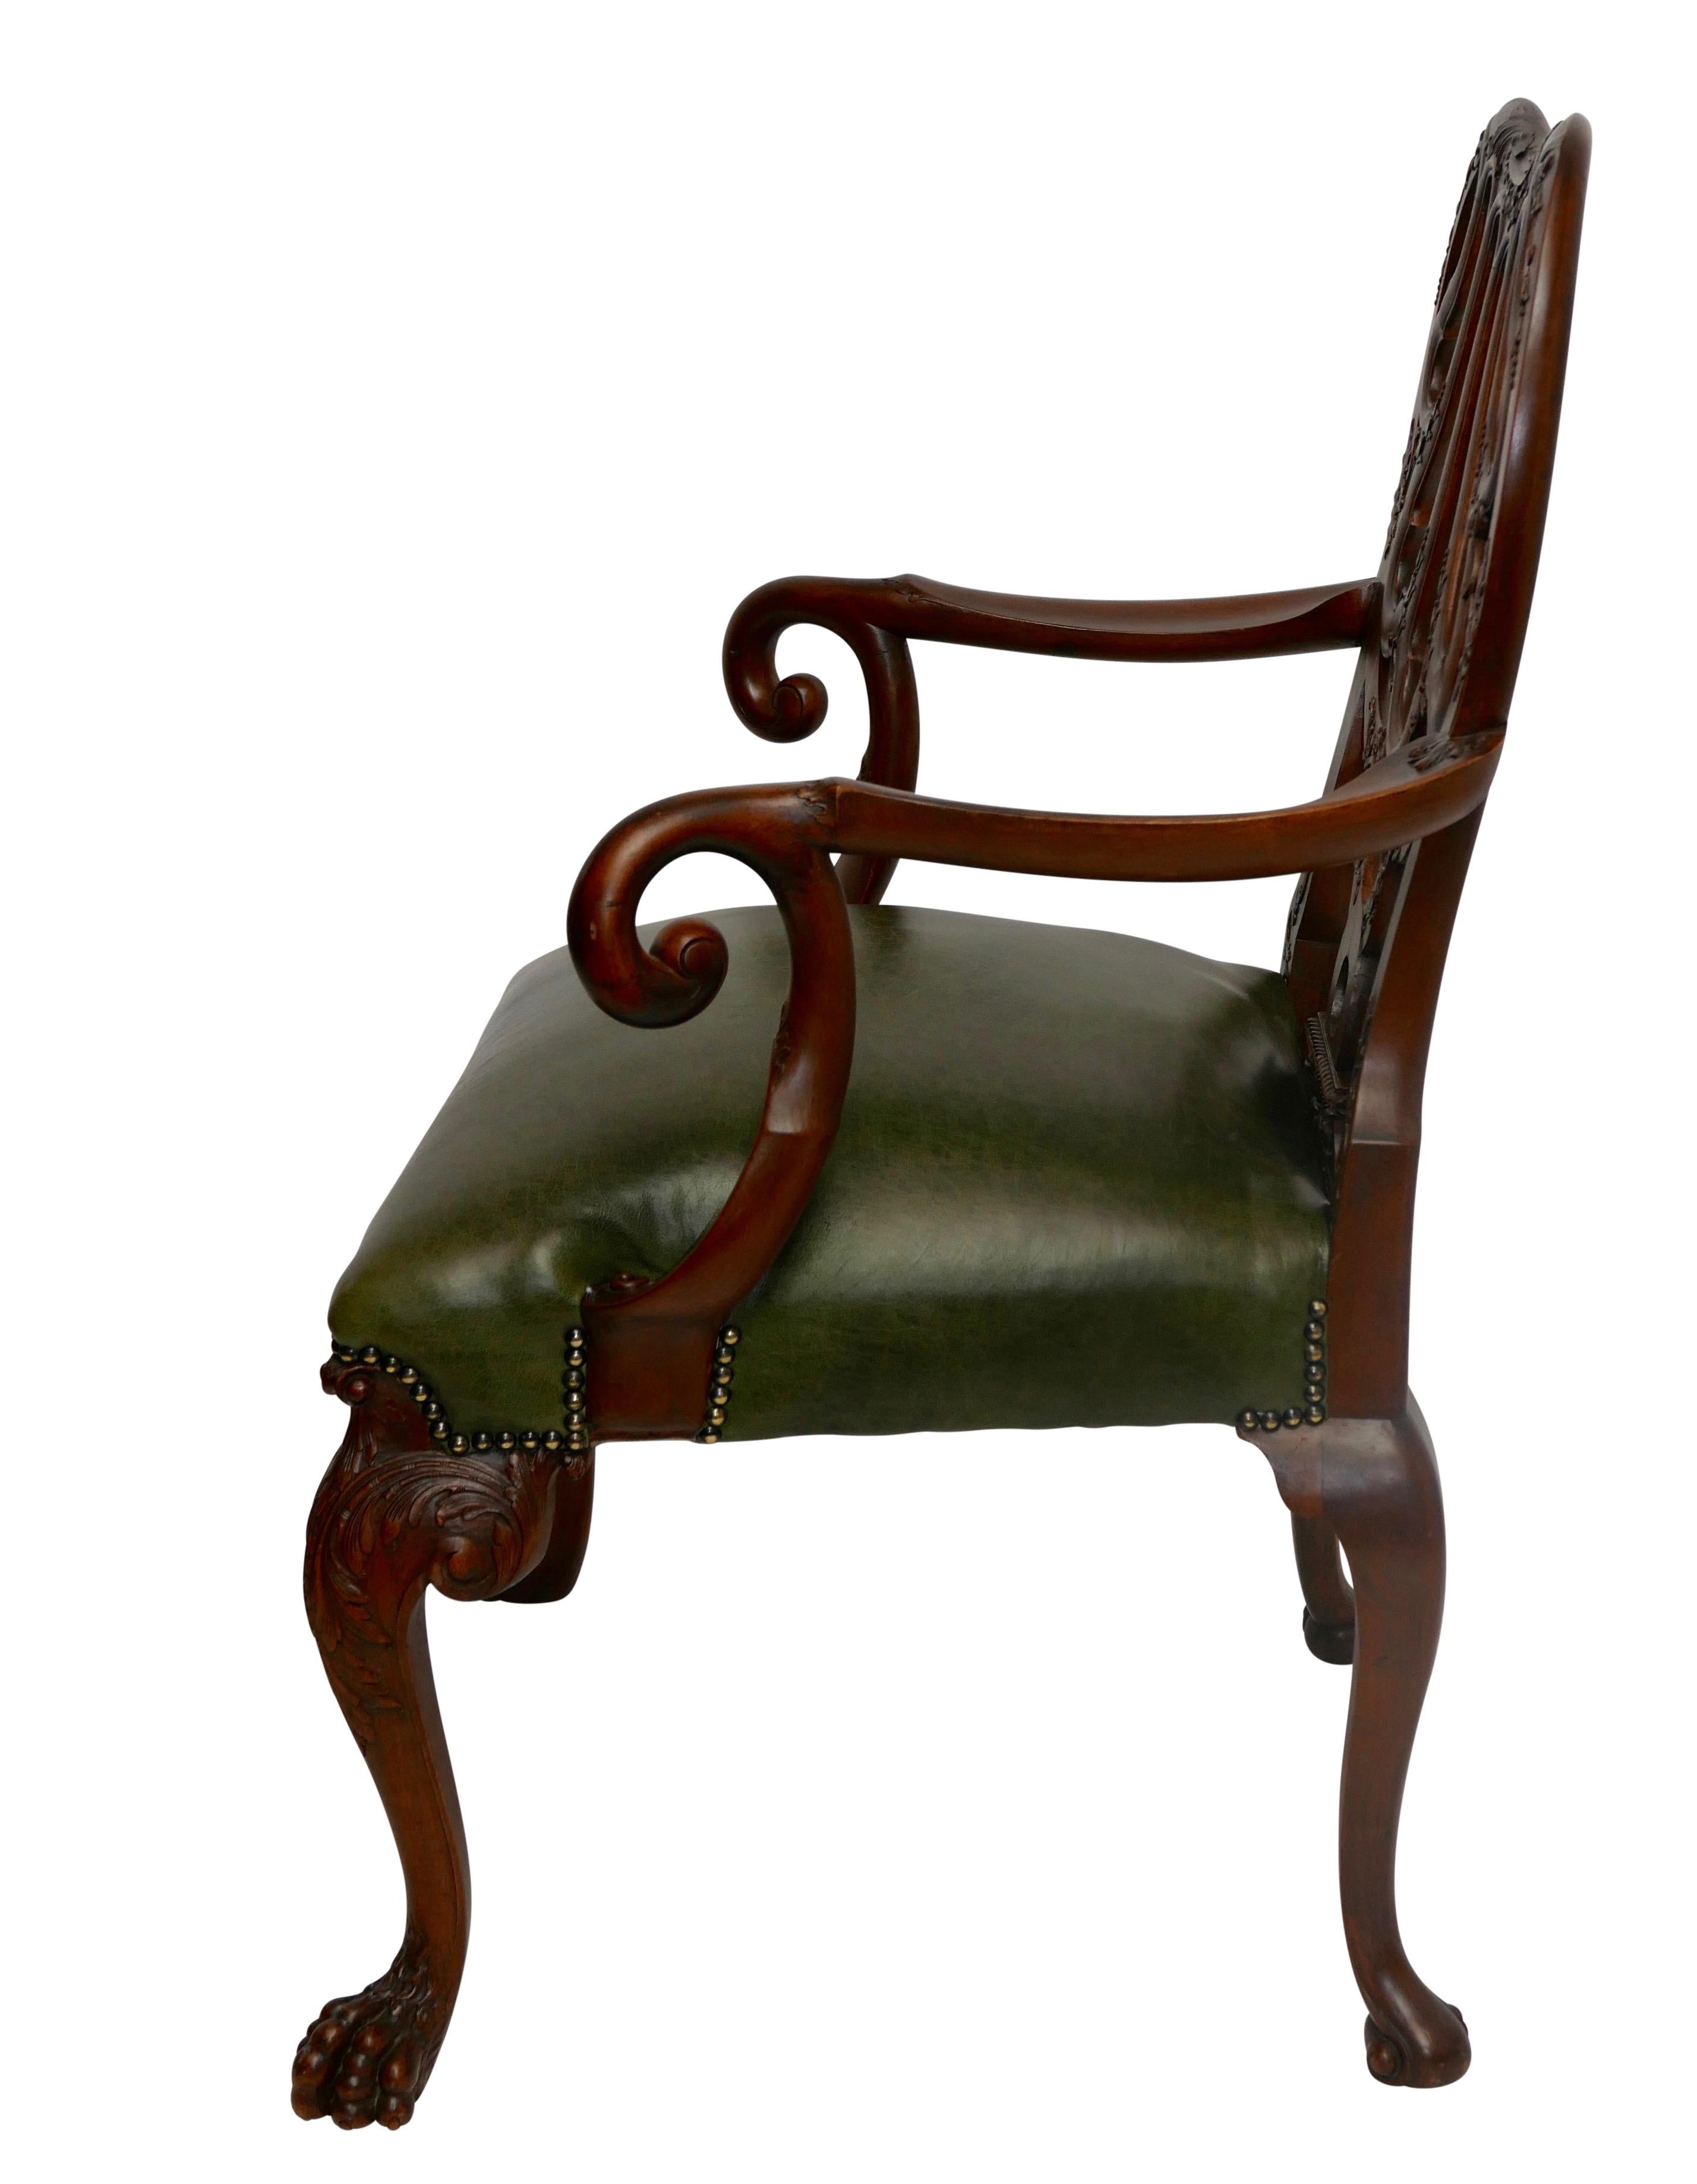 Walnut and Leather Armchair Desk Chair after Giles Grendey, Late 19th Century For Sale 3